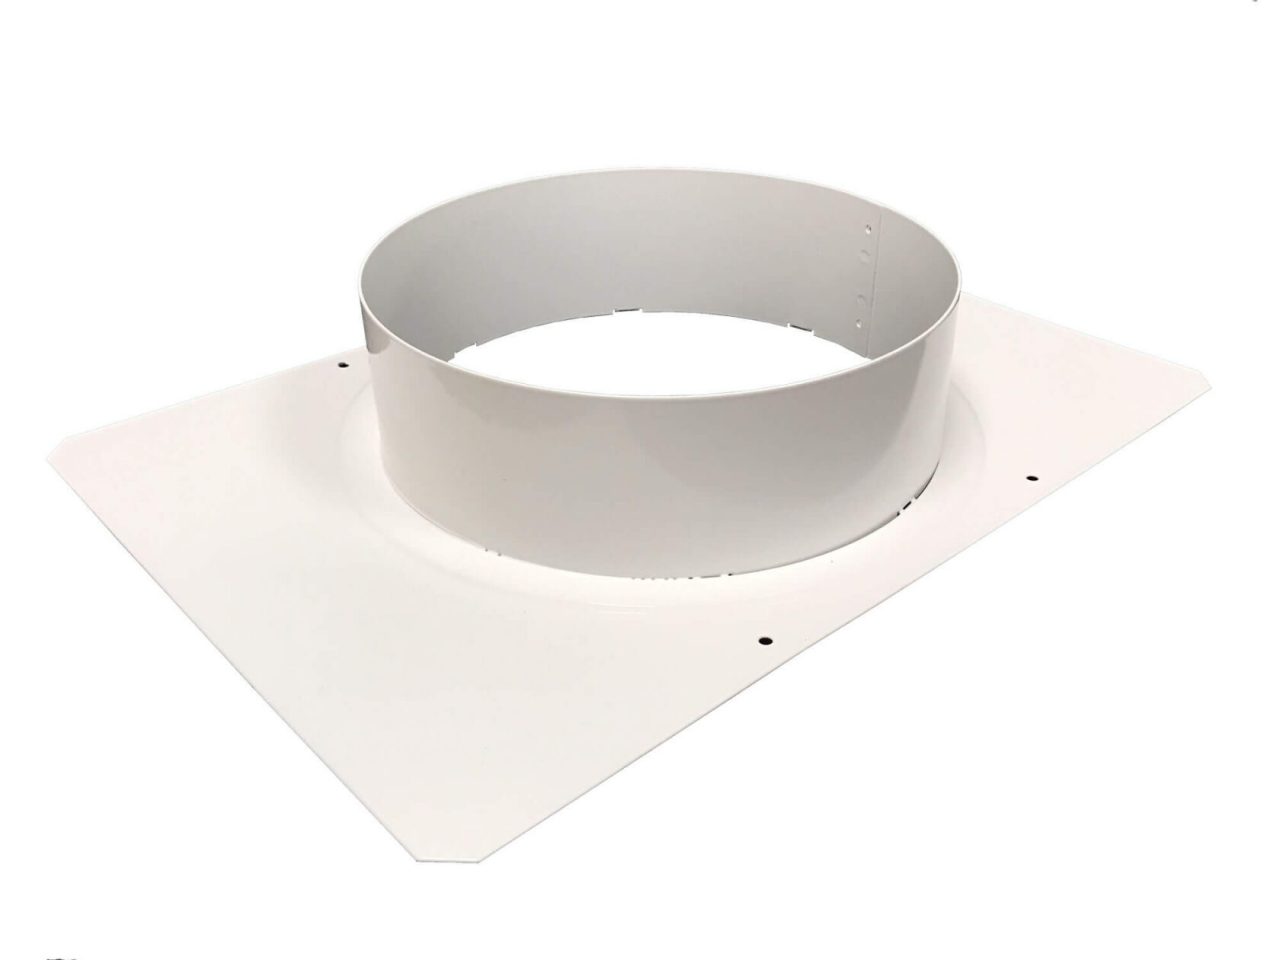  Tri-Kleen ducted collar